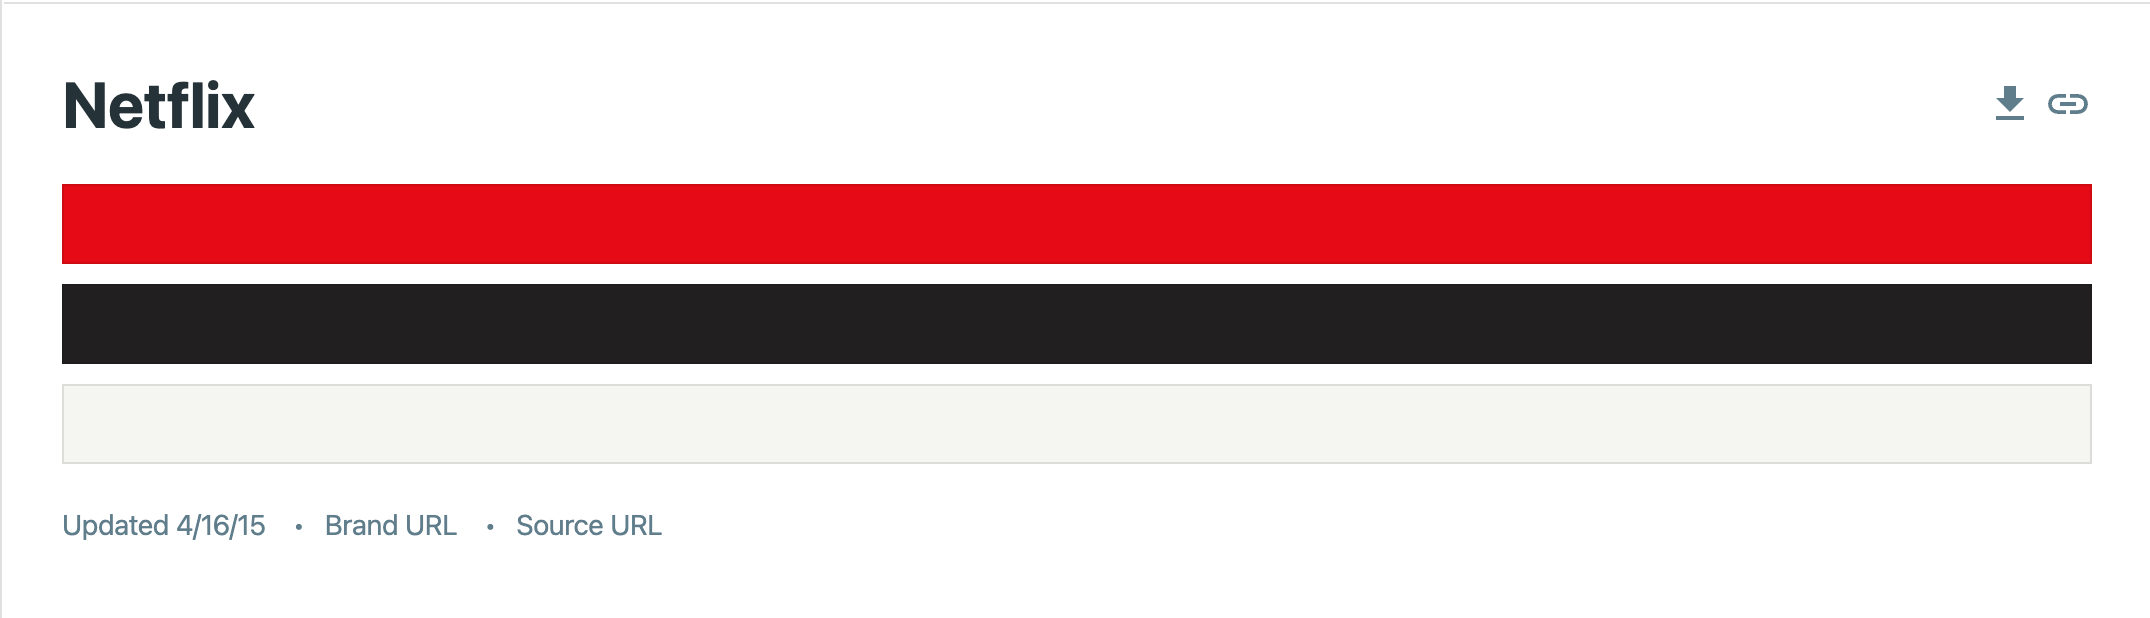 Netflix's brand colors (red, black, and white)